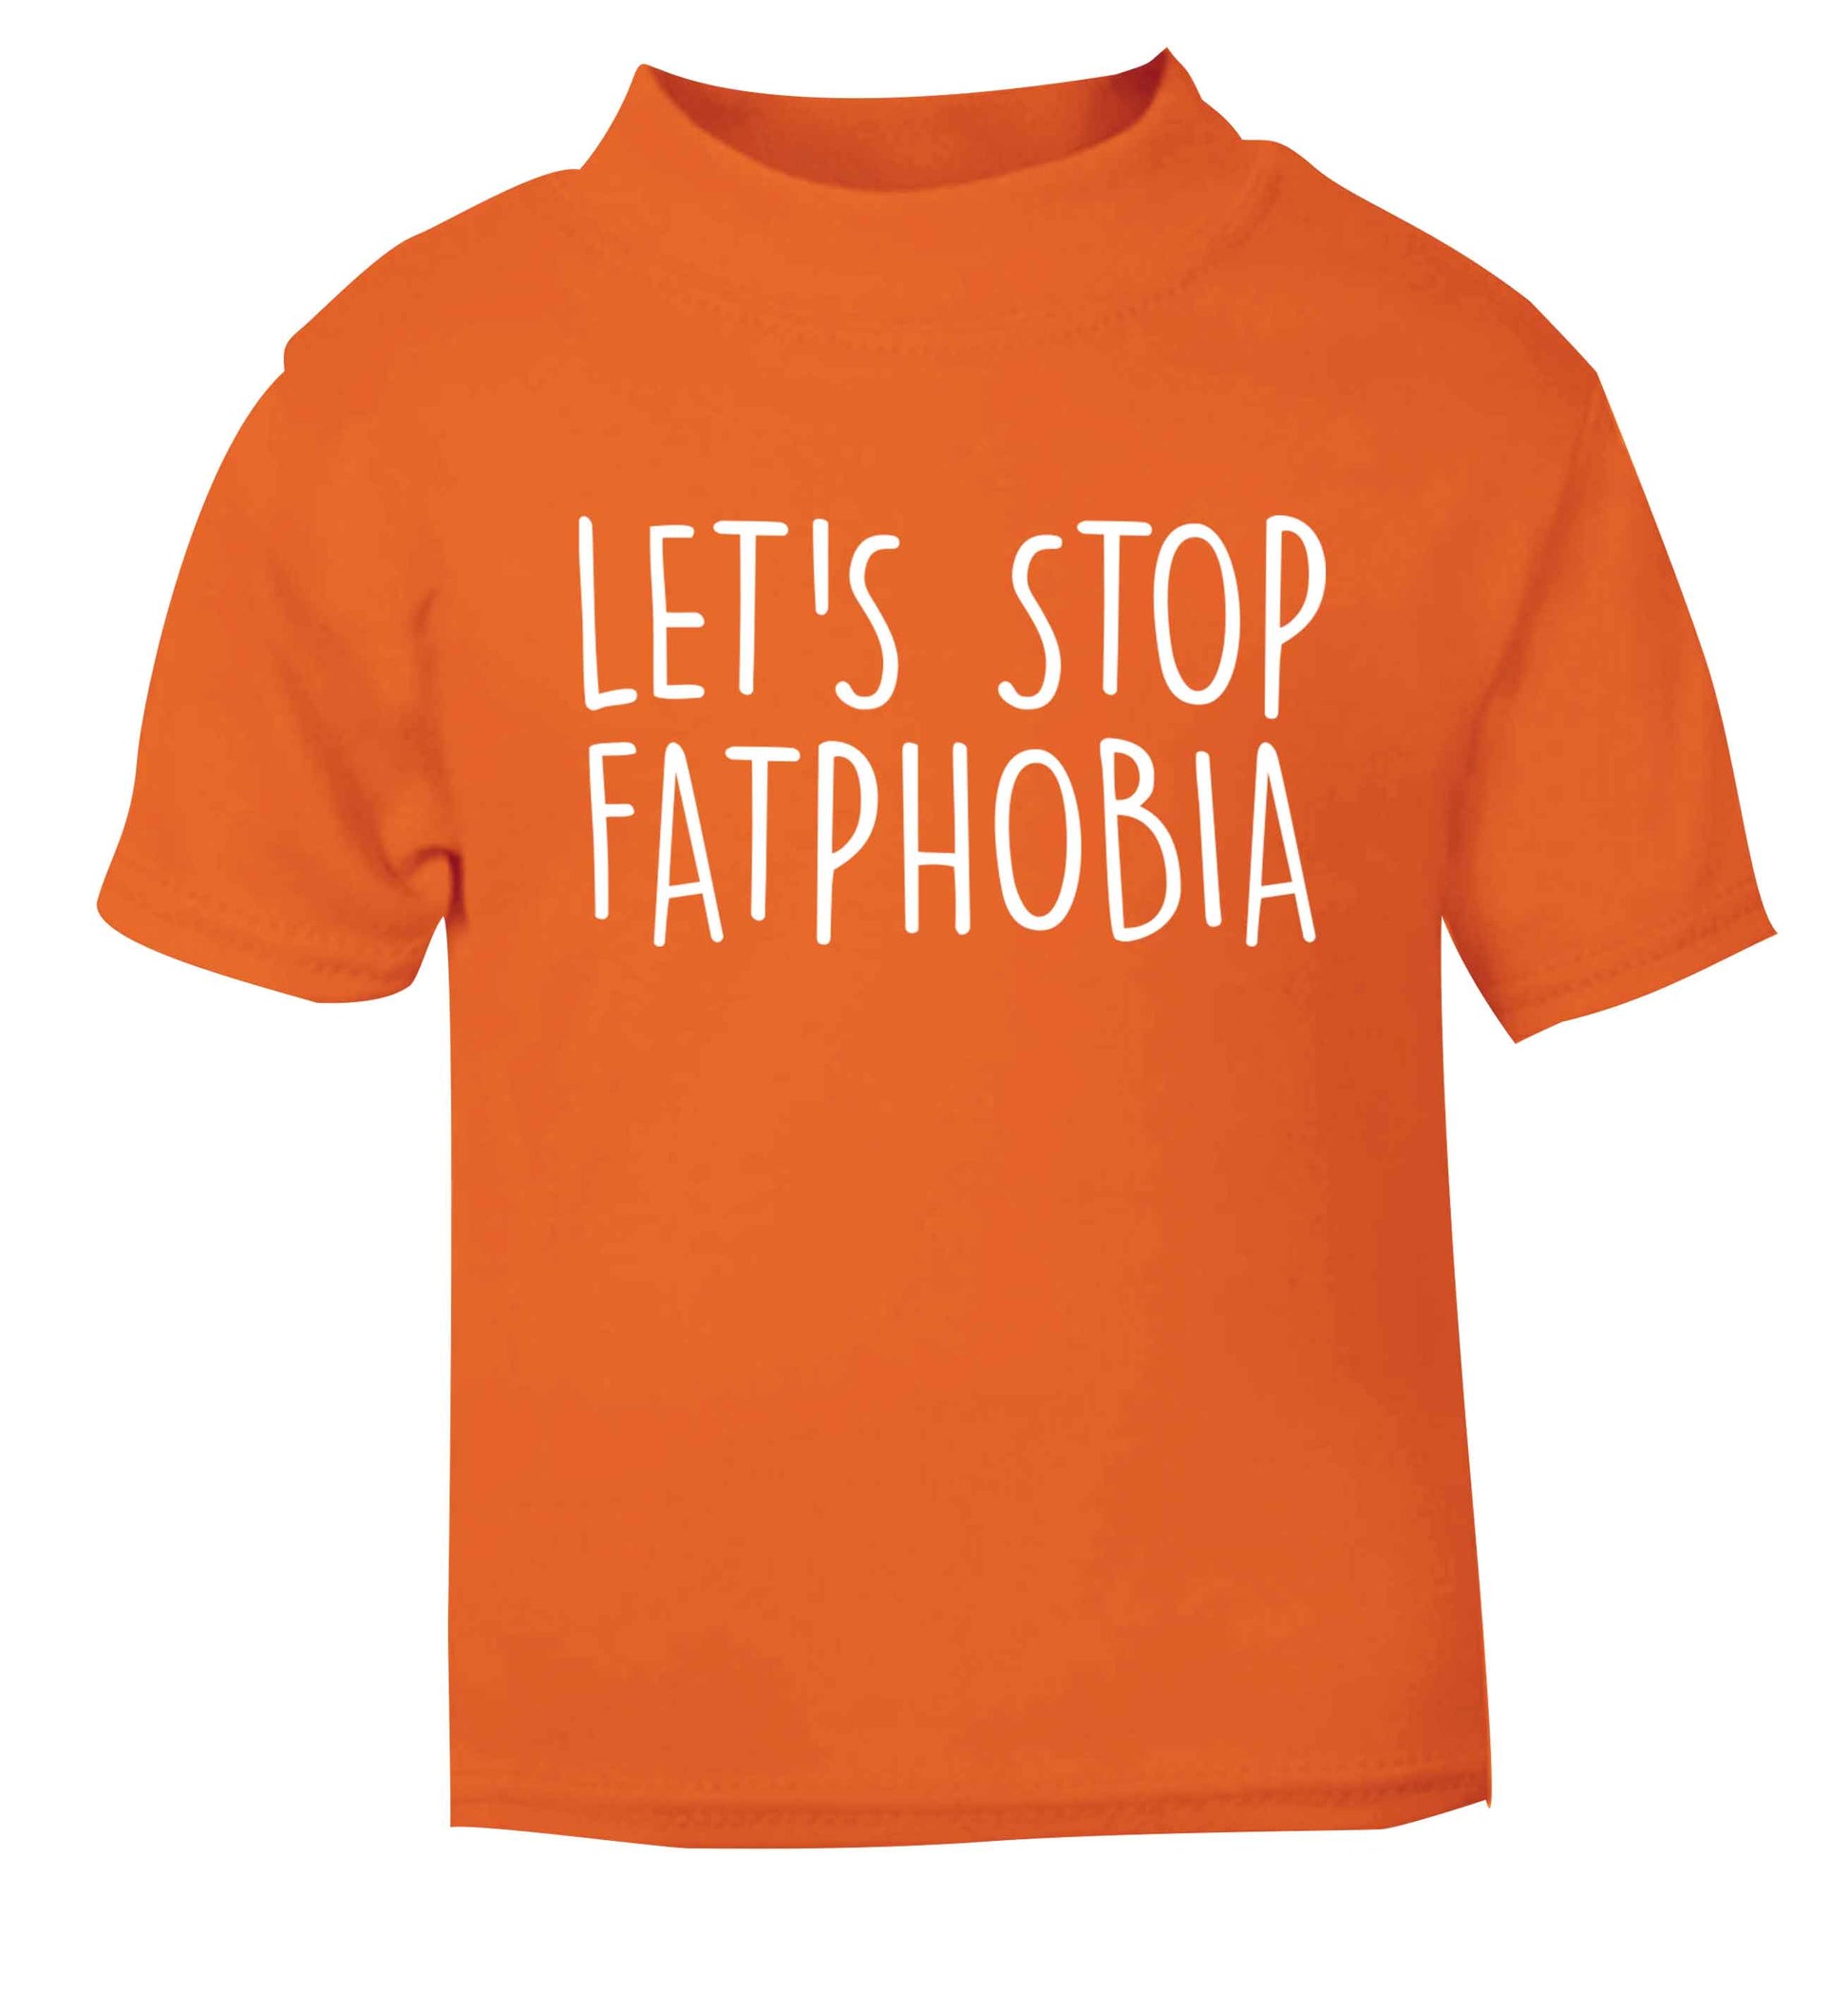 Let's stop fatphobia orange baby toddler Tshirt 2 Years